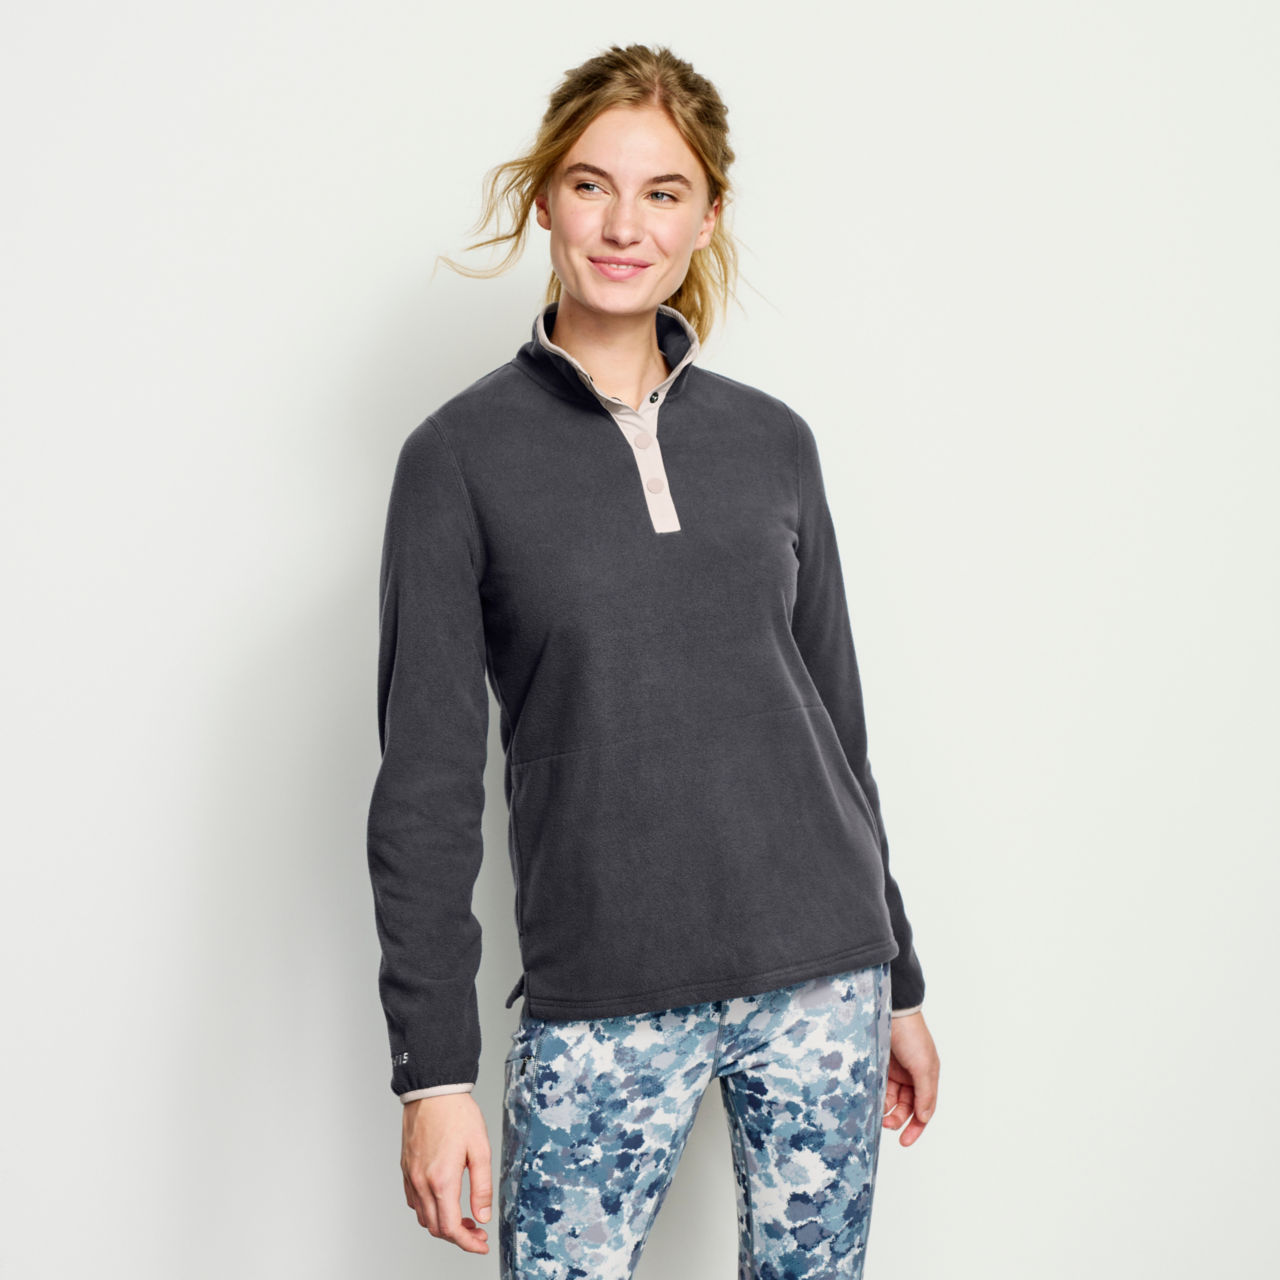 Women’s Hill Country Microfleece Quarter-Snap - CARBON image number 0